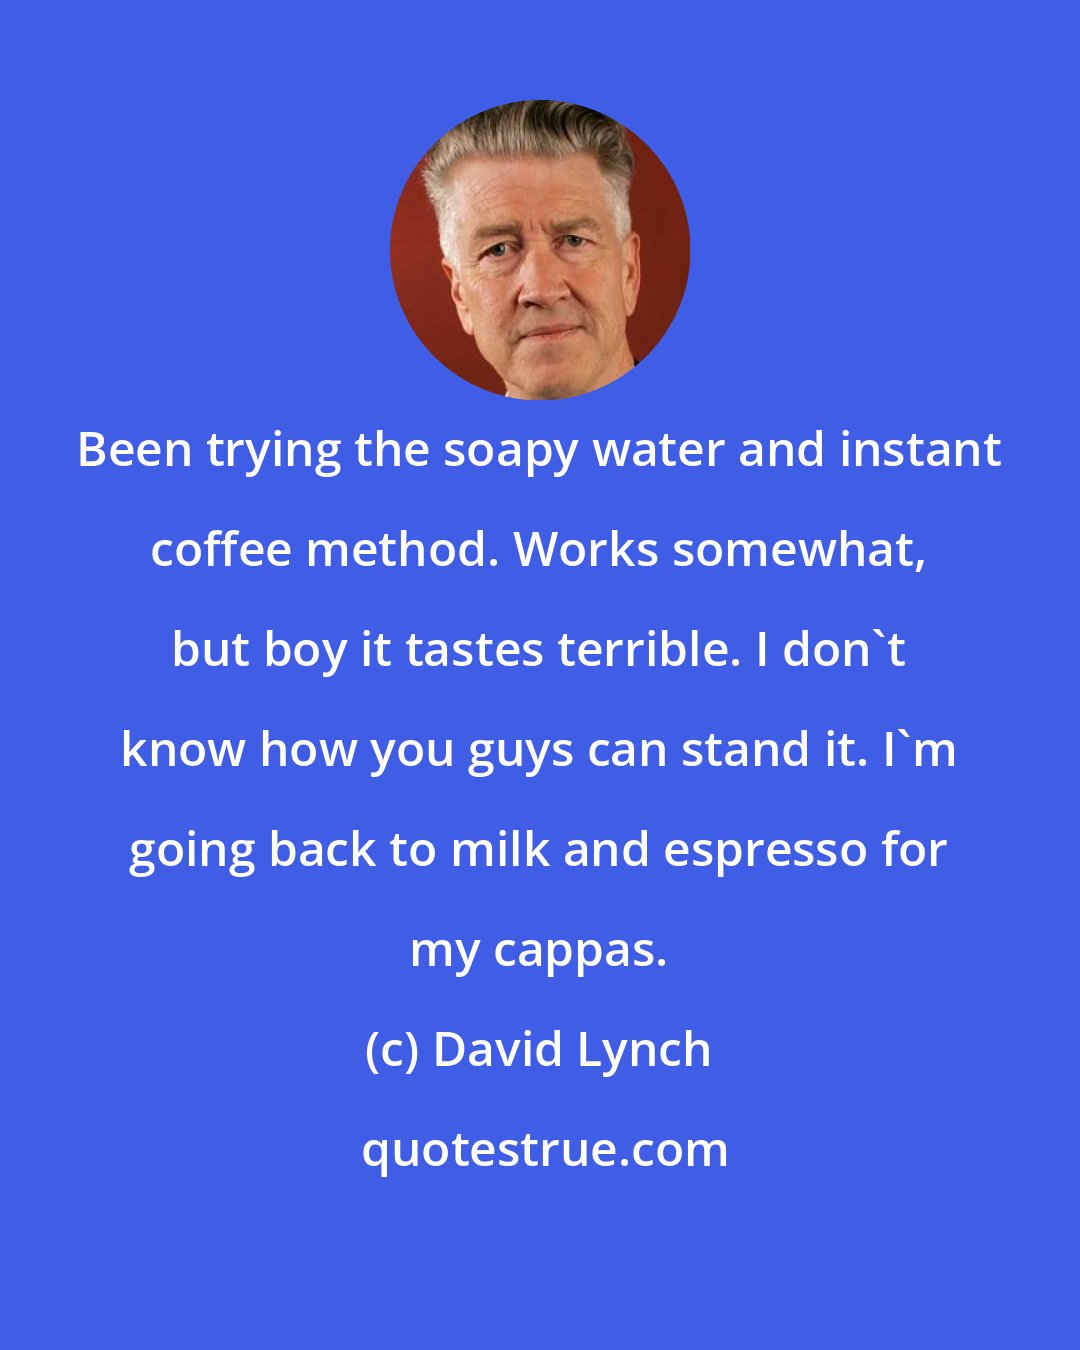 David Lynch: Been trying the soapy water and instant coffee method. Works somewhat, but boy it tastes terrible. I don't know how you guys can stand it. I'm going back to milk and espresso for my cappas.